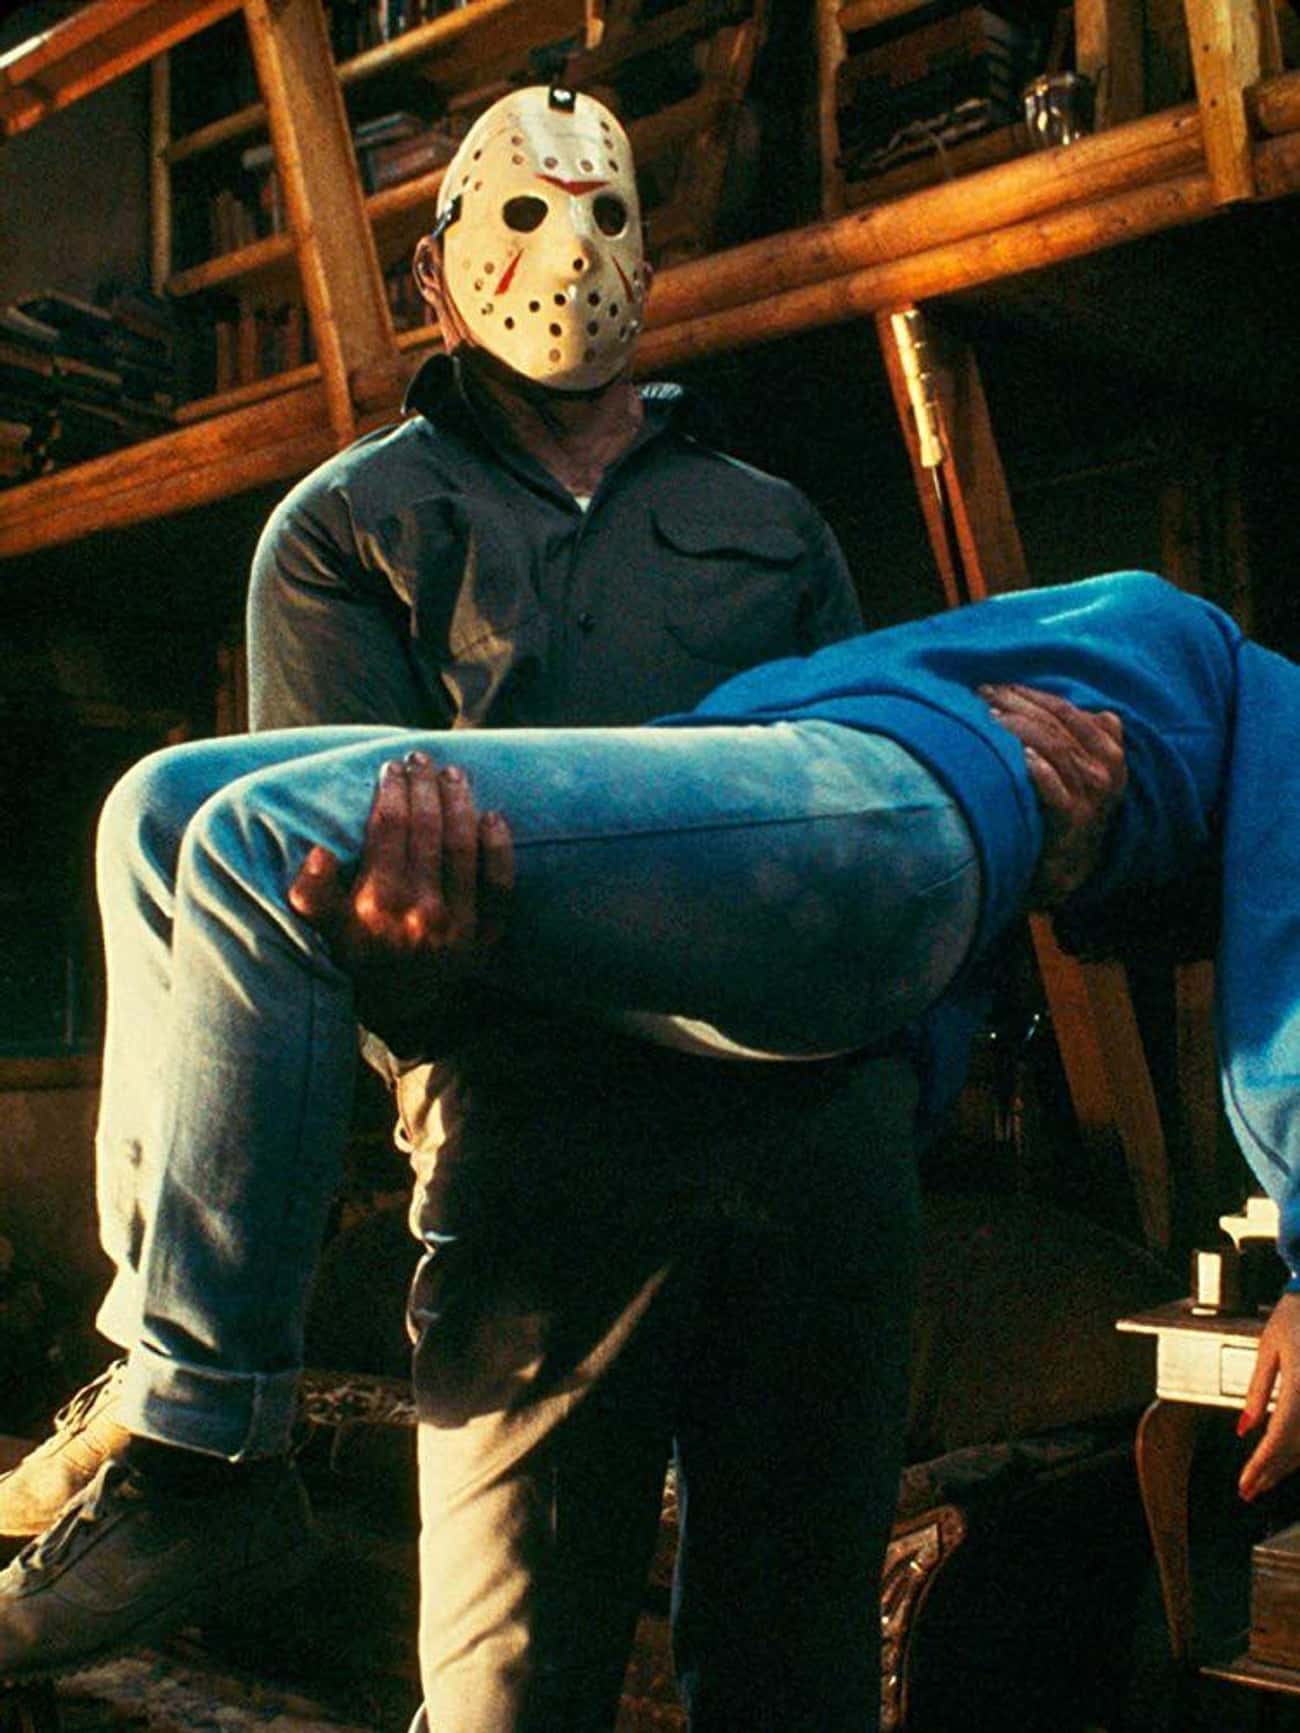 Jason Classic 'Friday the 13th Part III'